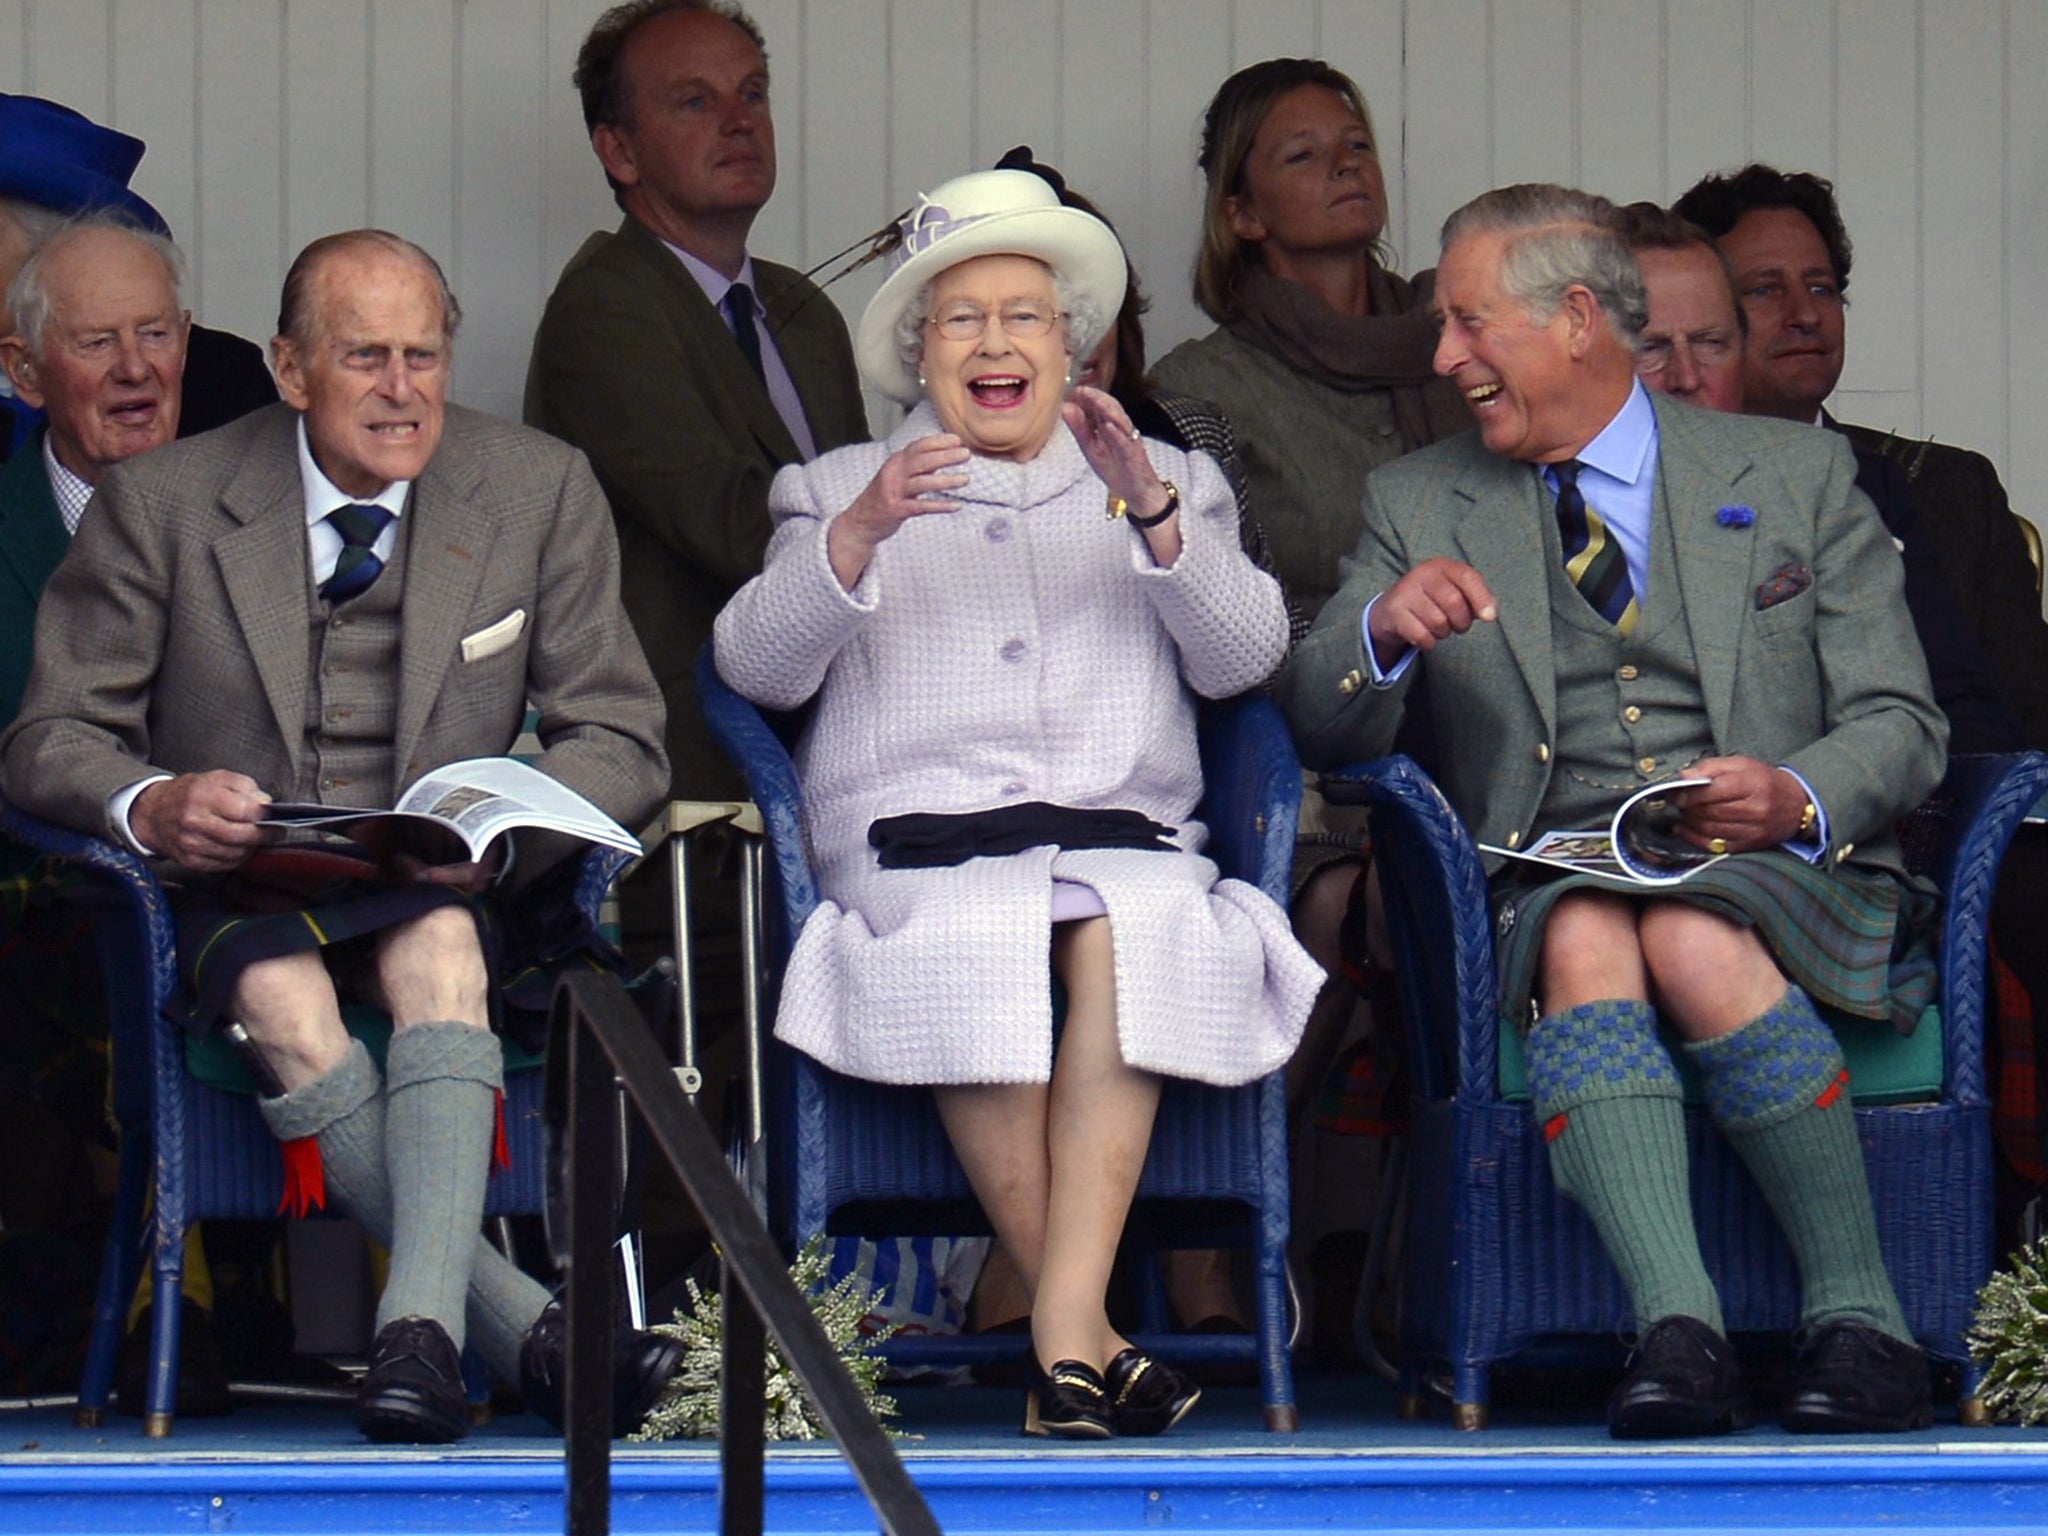 Members of Britain's royal family (front L to R) Prince Philip, Queen Elizabeth and Prince Charles cheer as competitors participate in a sack race at the Braemar Gathering in Braemar, Scotland, 2012